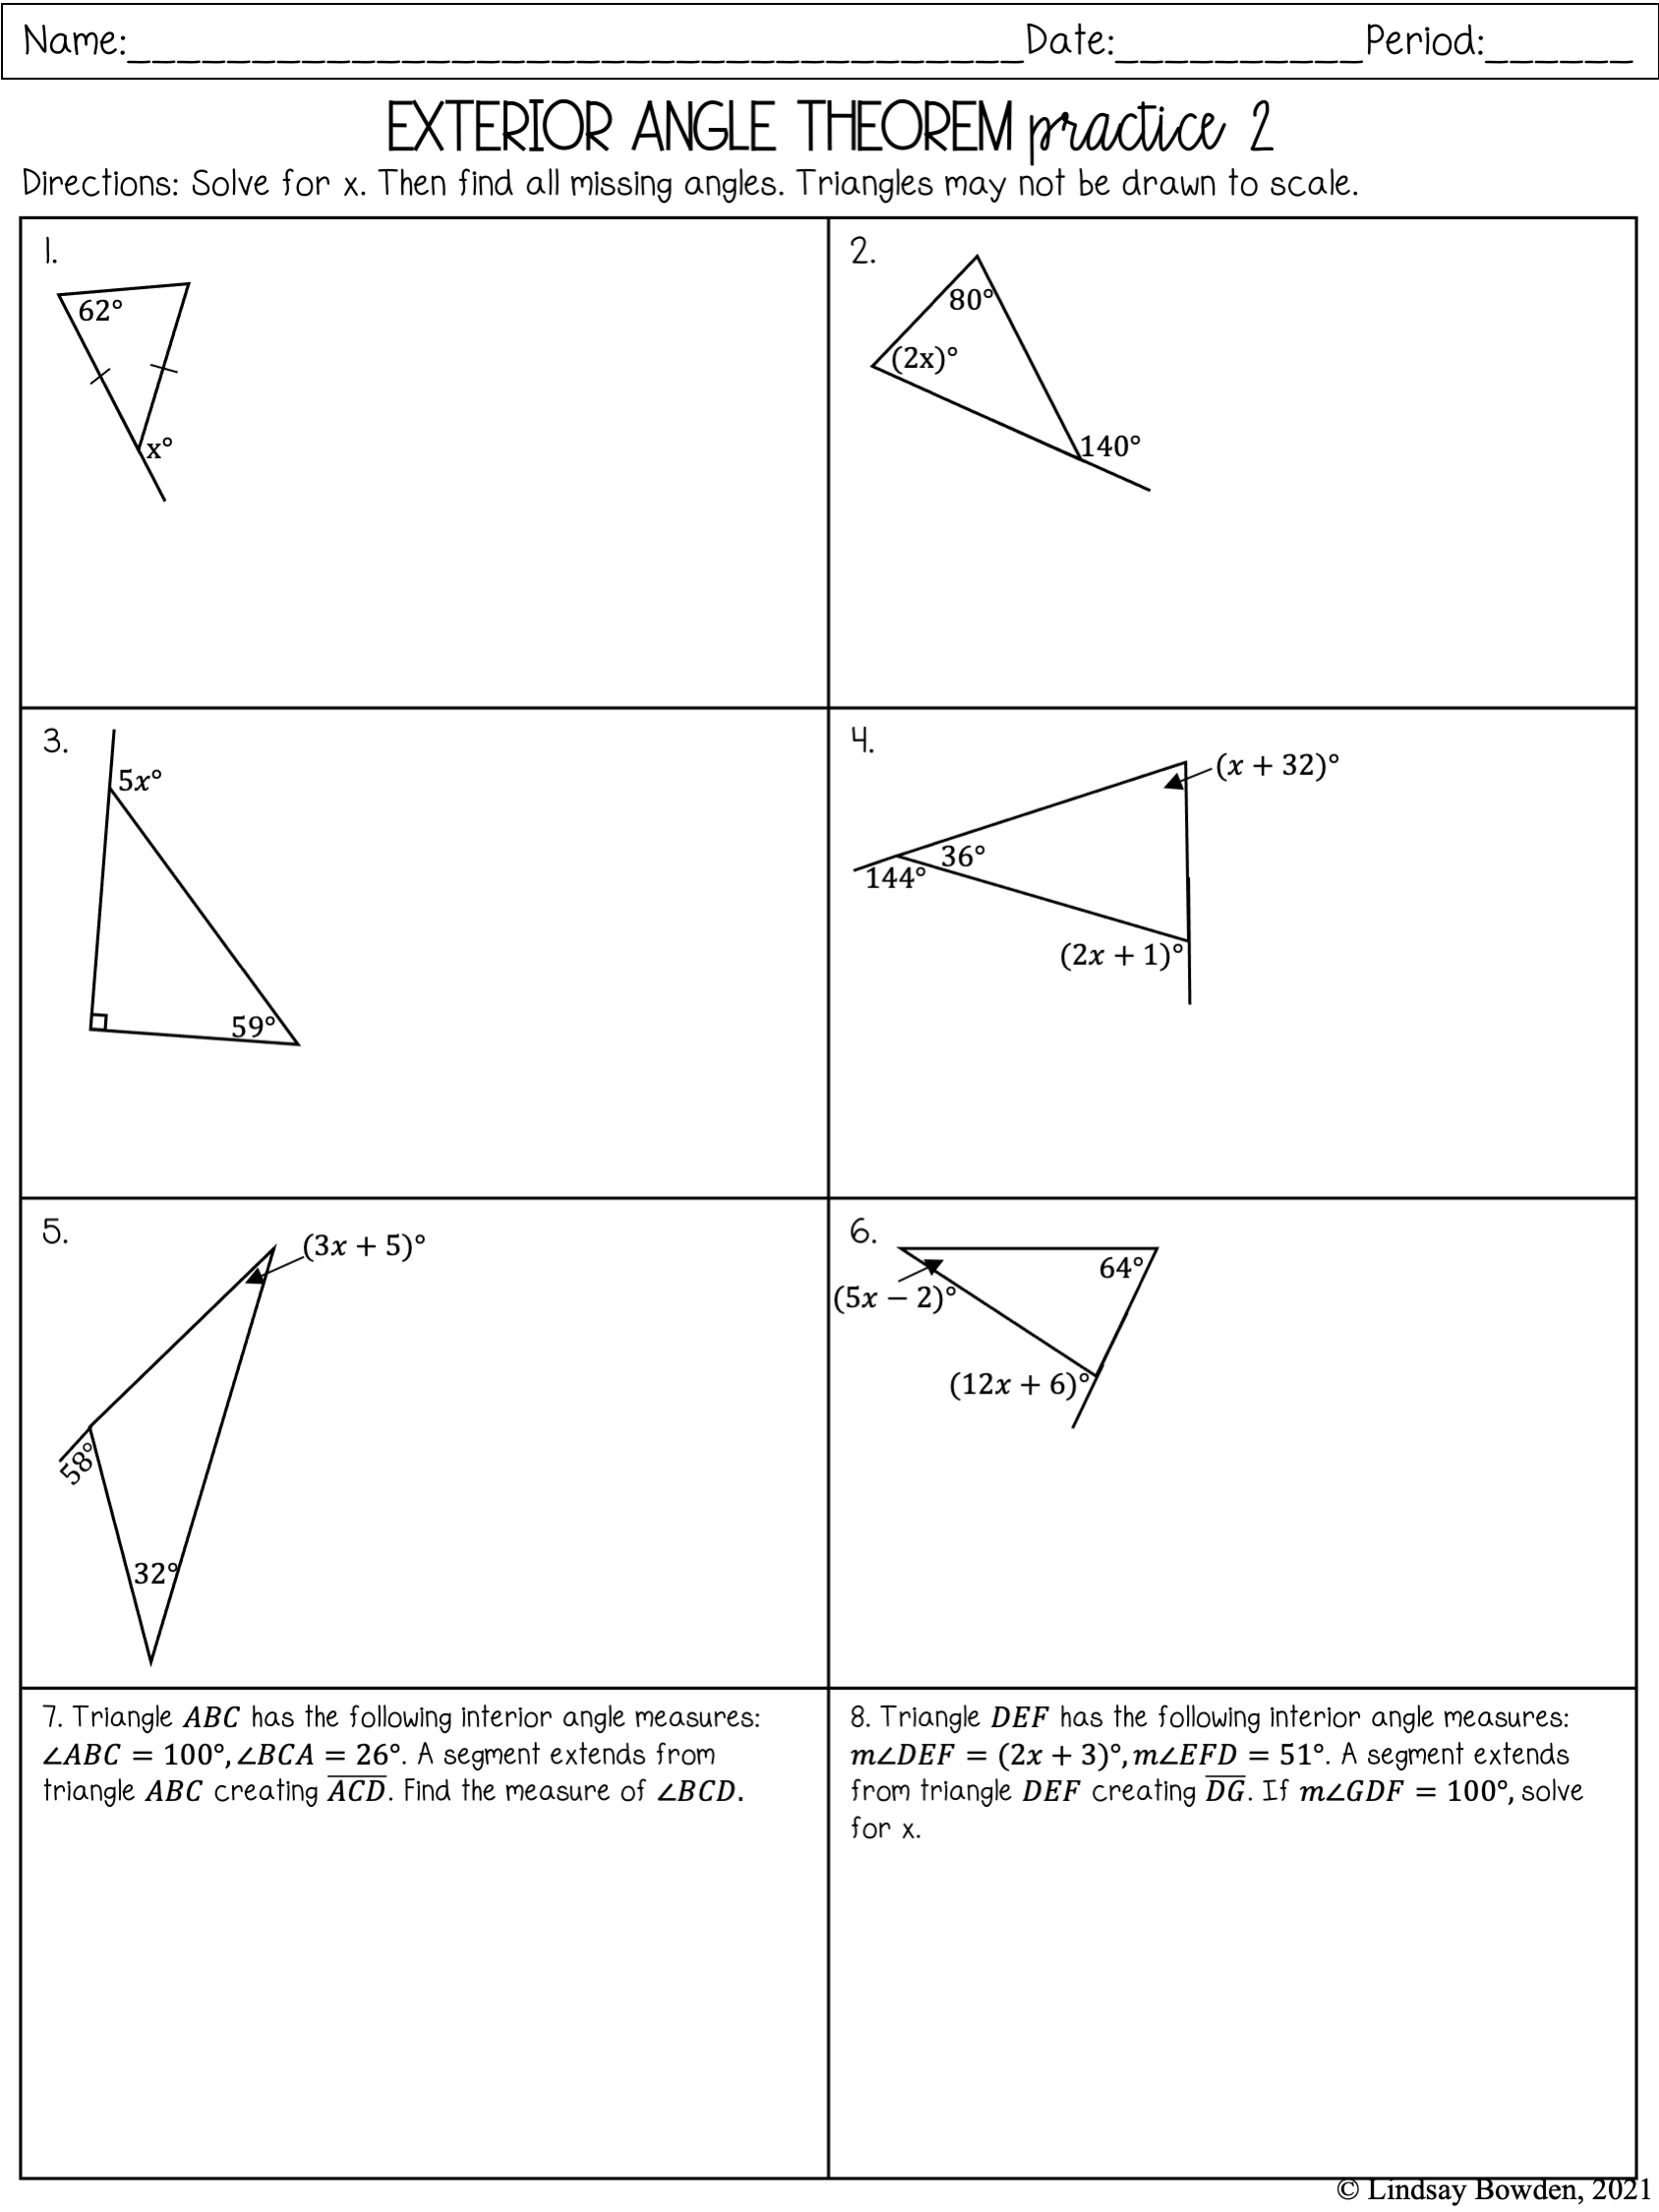 Exterior Angle Theorem Notes & Worksheets - Lindsay Bowden For Exterior Angle Theorem Worksheet